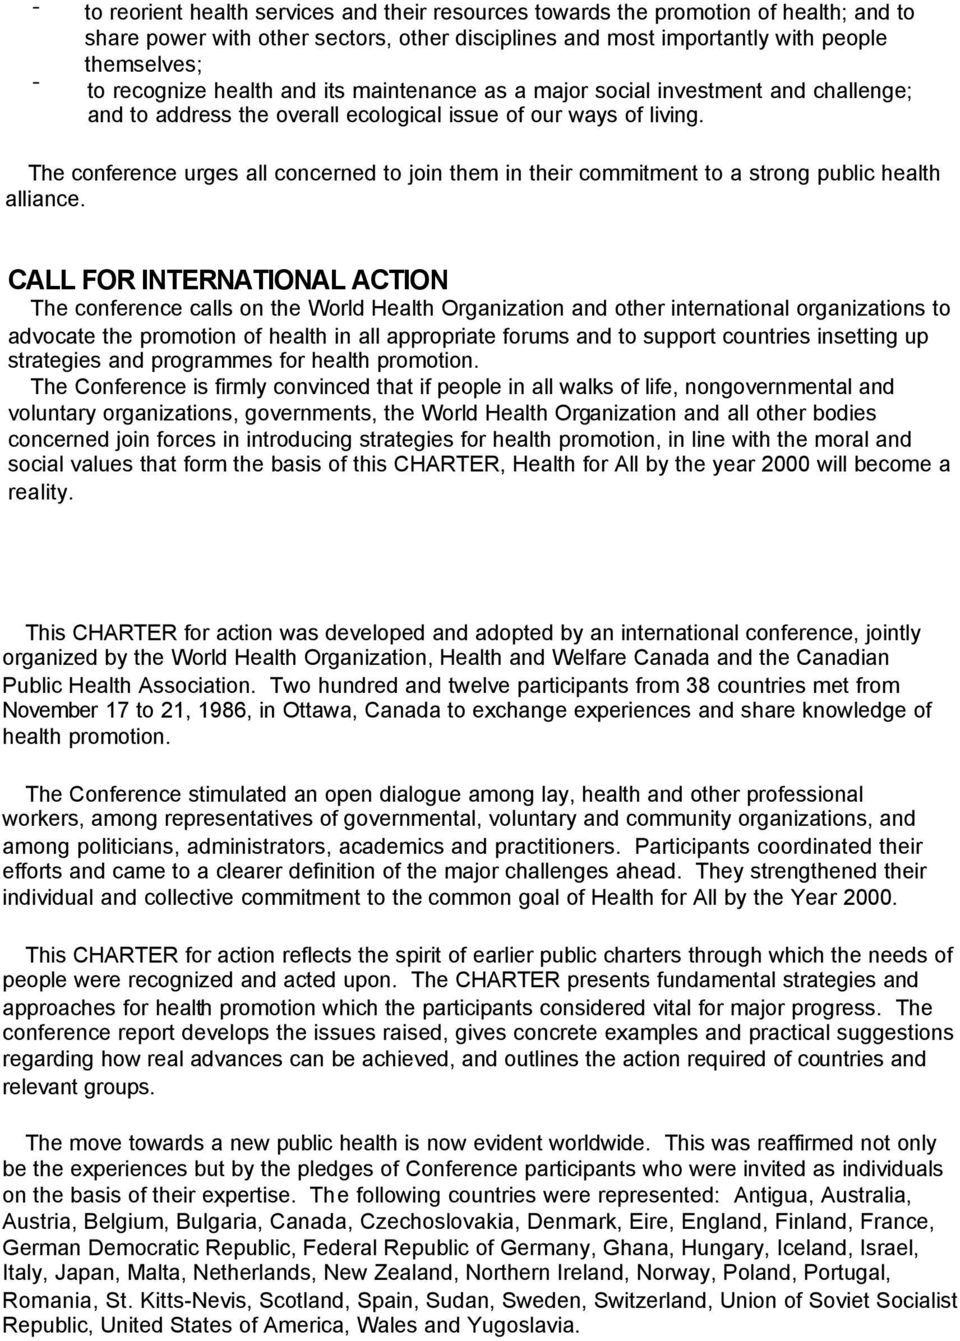 The conference urges all concerned to join them in their commitment to a strong public health alliance.